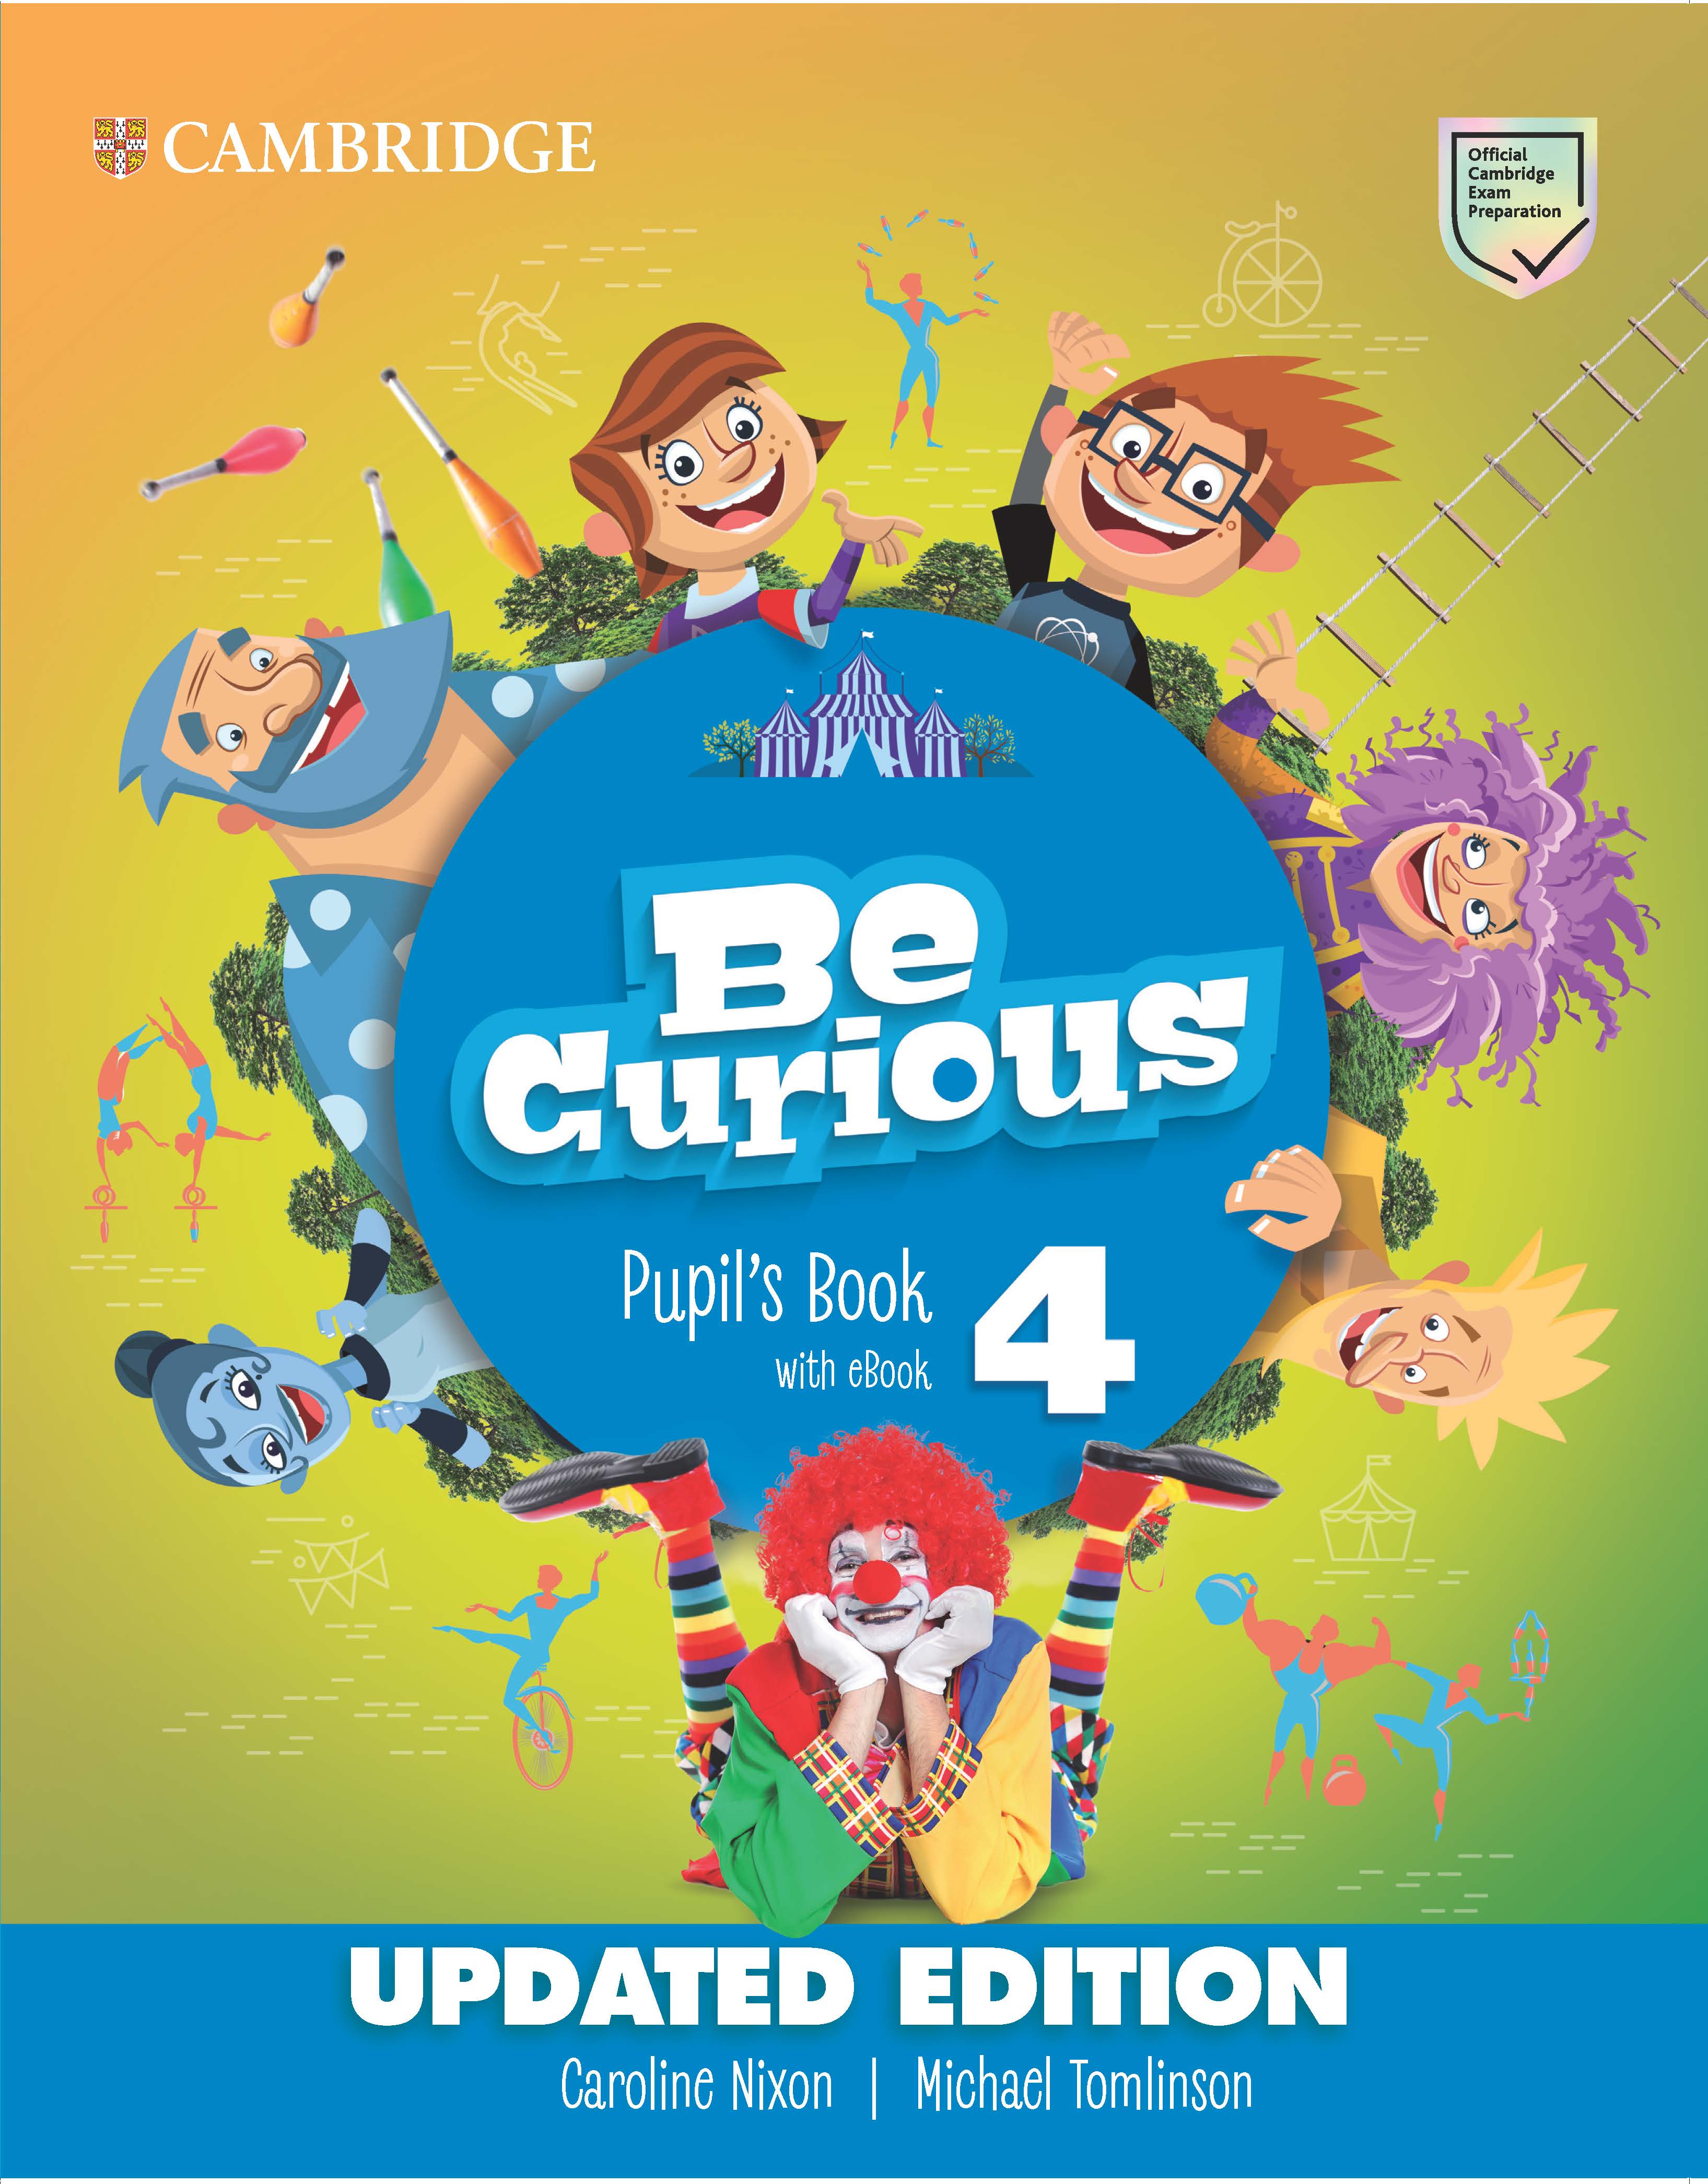 Be Curious 4 Pupil's Book (SCORM) | Digital book | BlinkLearning